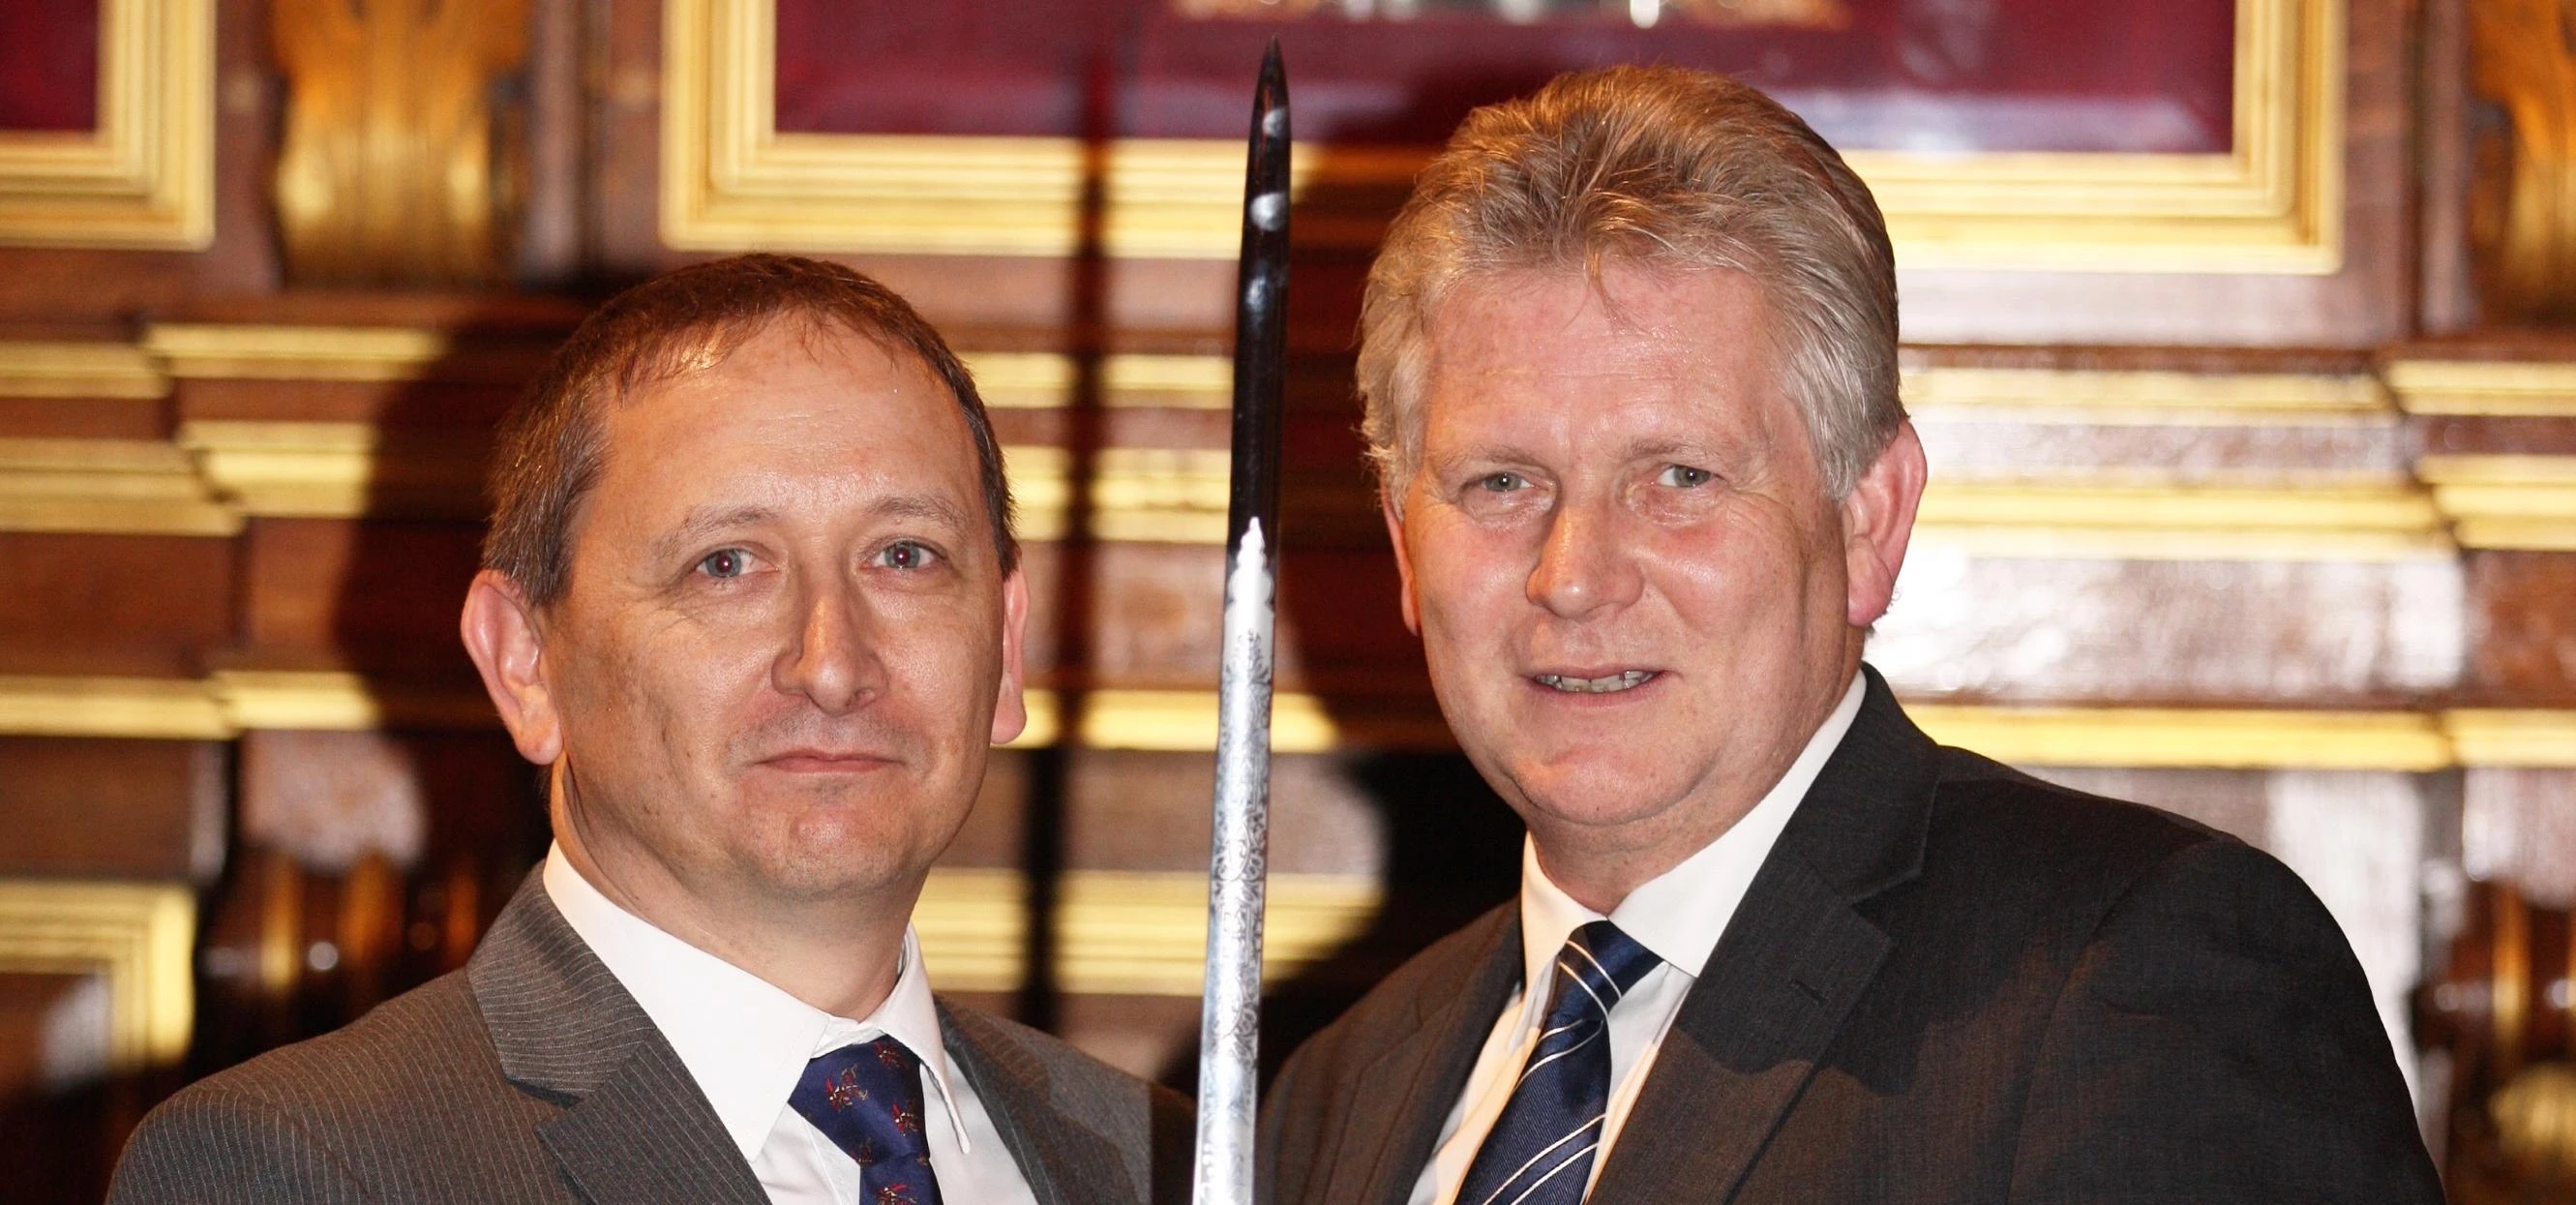 Metromail's Neil Buckett being presented the sword by Mike Robinson, chief executive of the British 